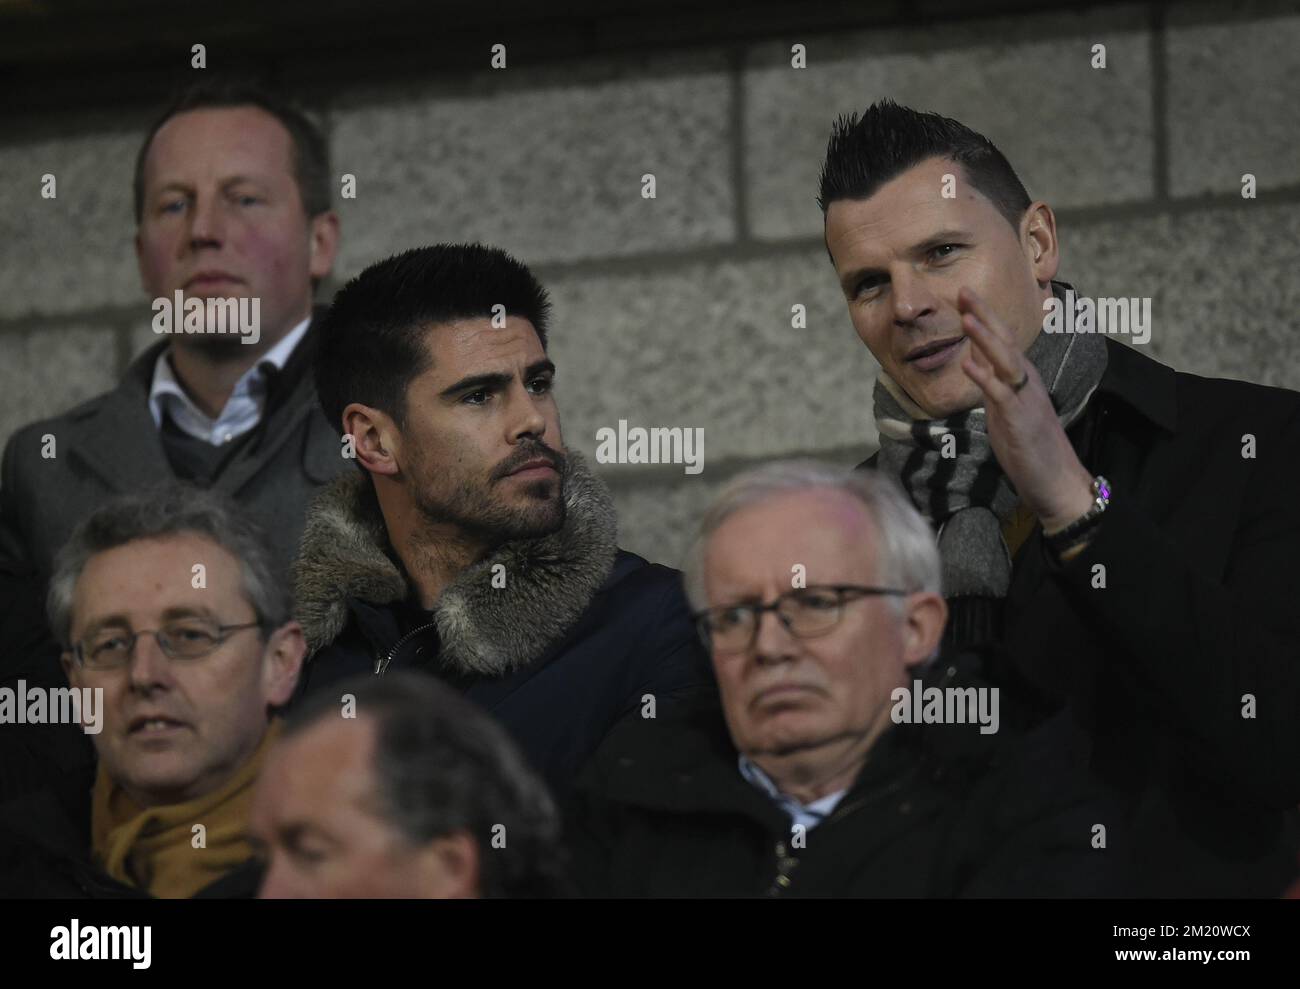 20160124 - LIEGE, BELGIUM: Standard's new goalkeeper Victor Valdes and Standard's Daniel Van Buyten pictured before the Jupiler Pro League match between Standard de Liege and AA Gent, in Liege, Sunday 24 January 2016, on the twenty-third day of the Belgian soccer Championship.  PHOTO JOHN THYS Stock Photo